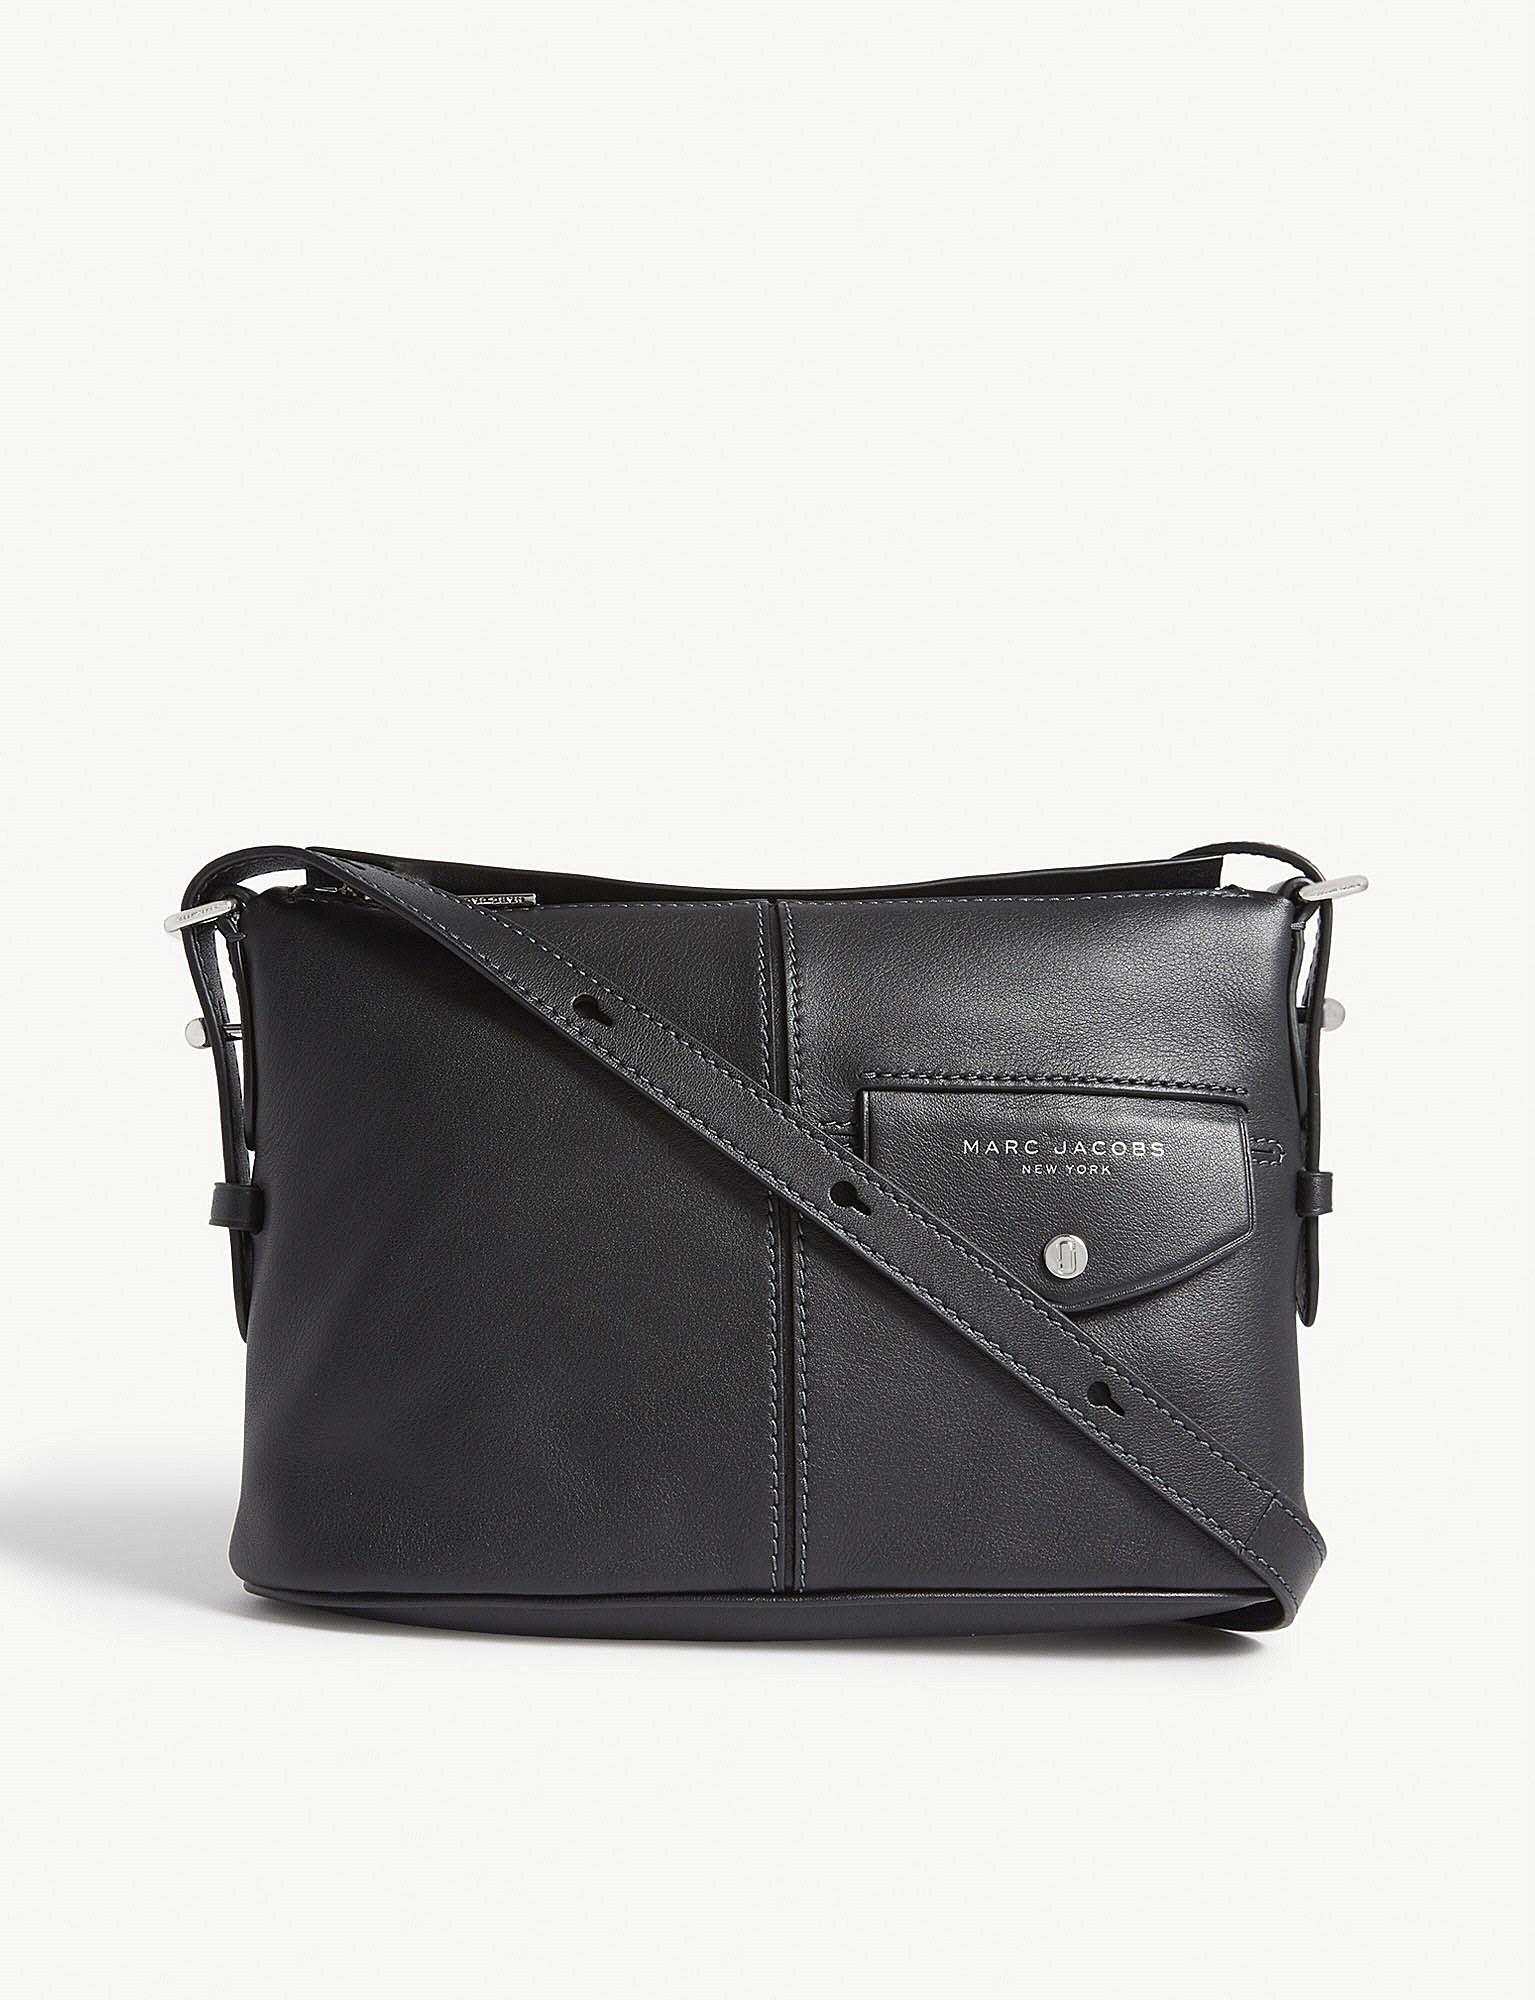 Marc Jacobs Leather The Side Sling Cross-body Bag in Black - Lyst